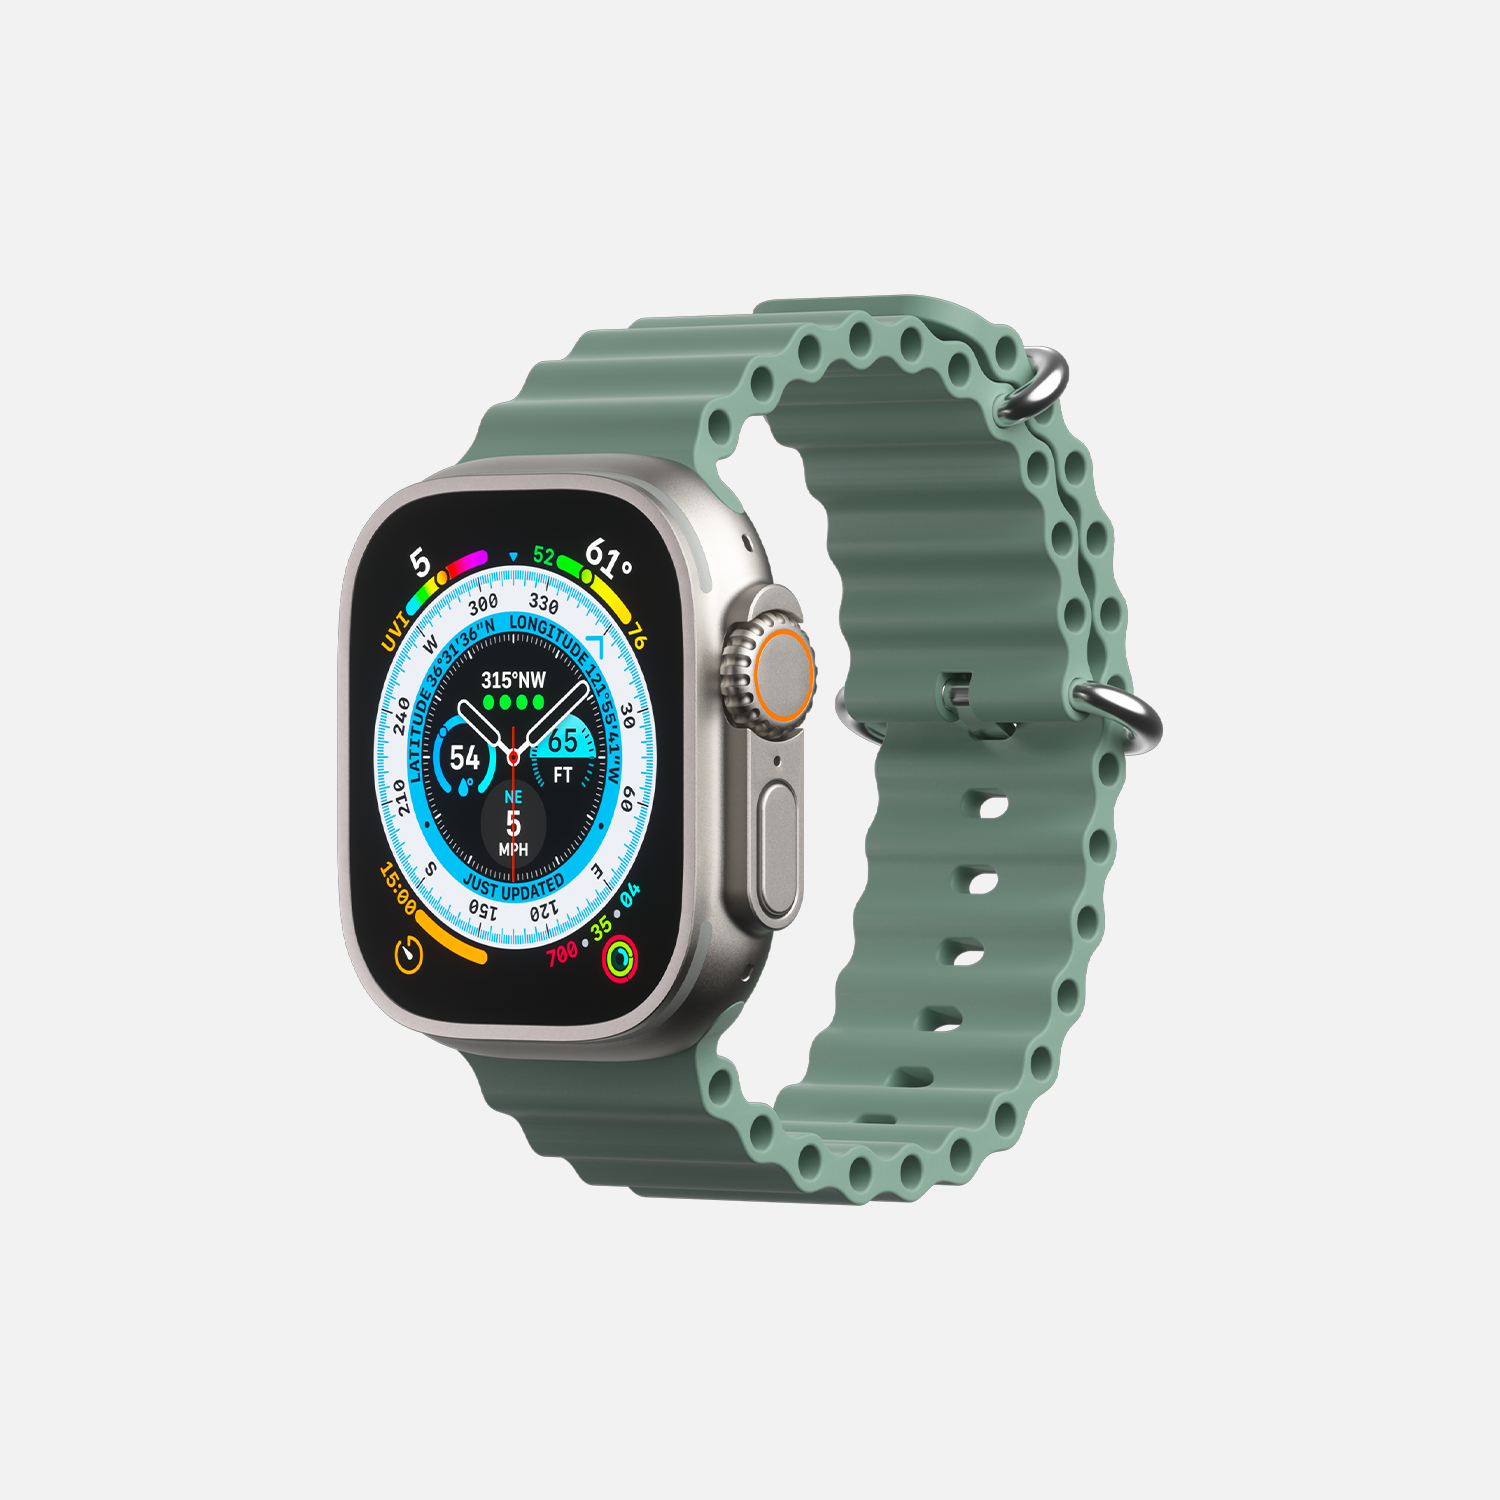 Smartwatch with colorful display and green sport band isolated on white background"